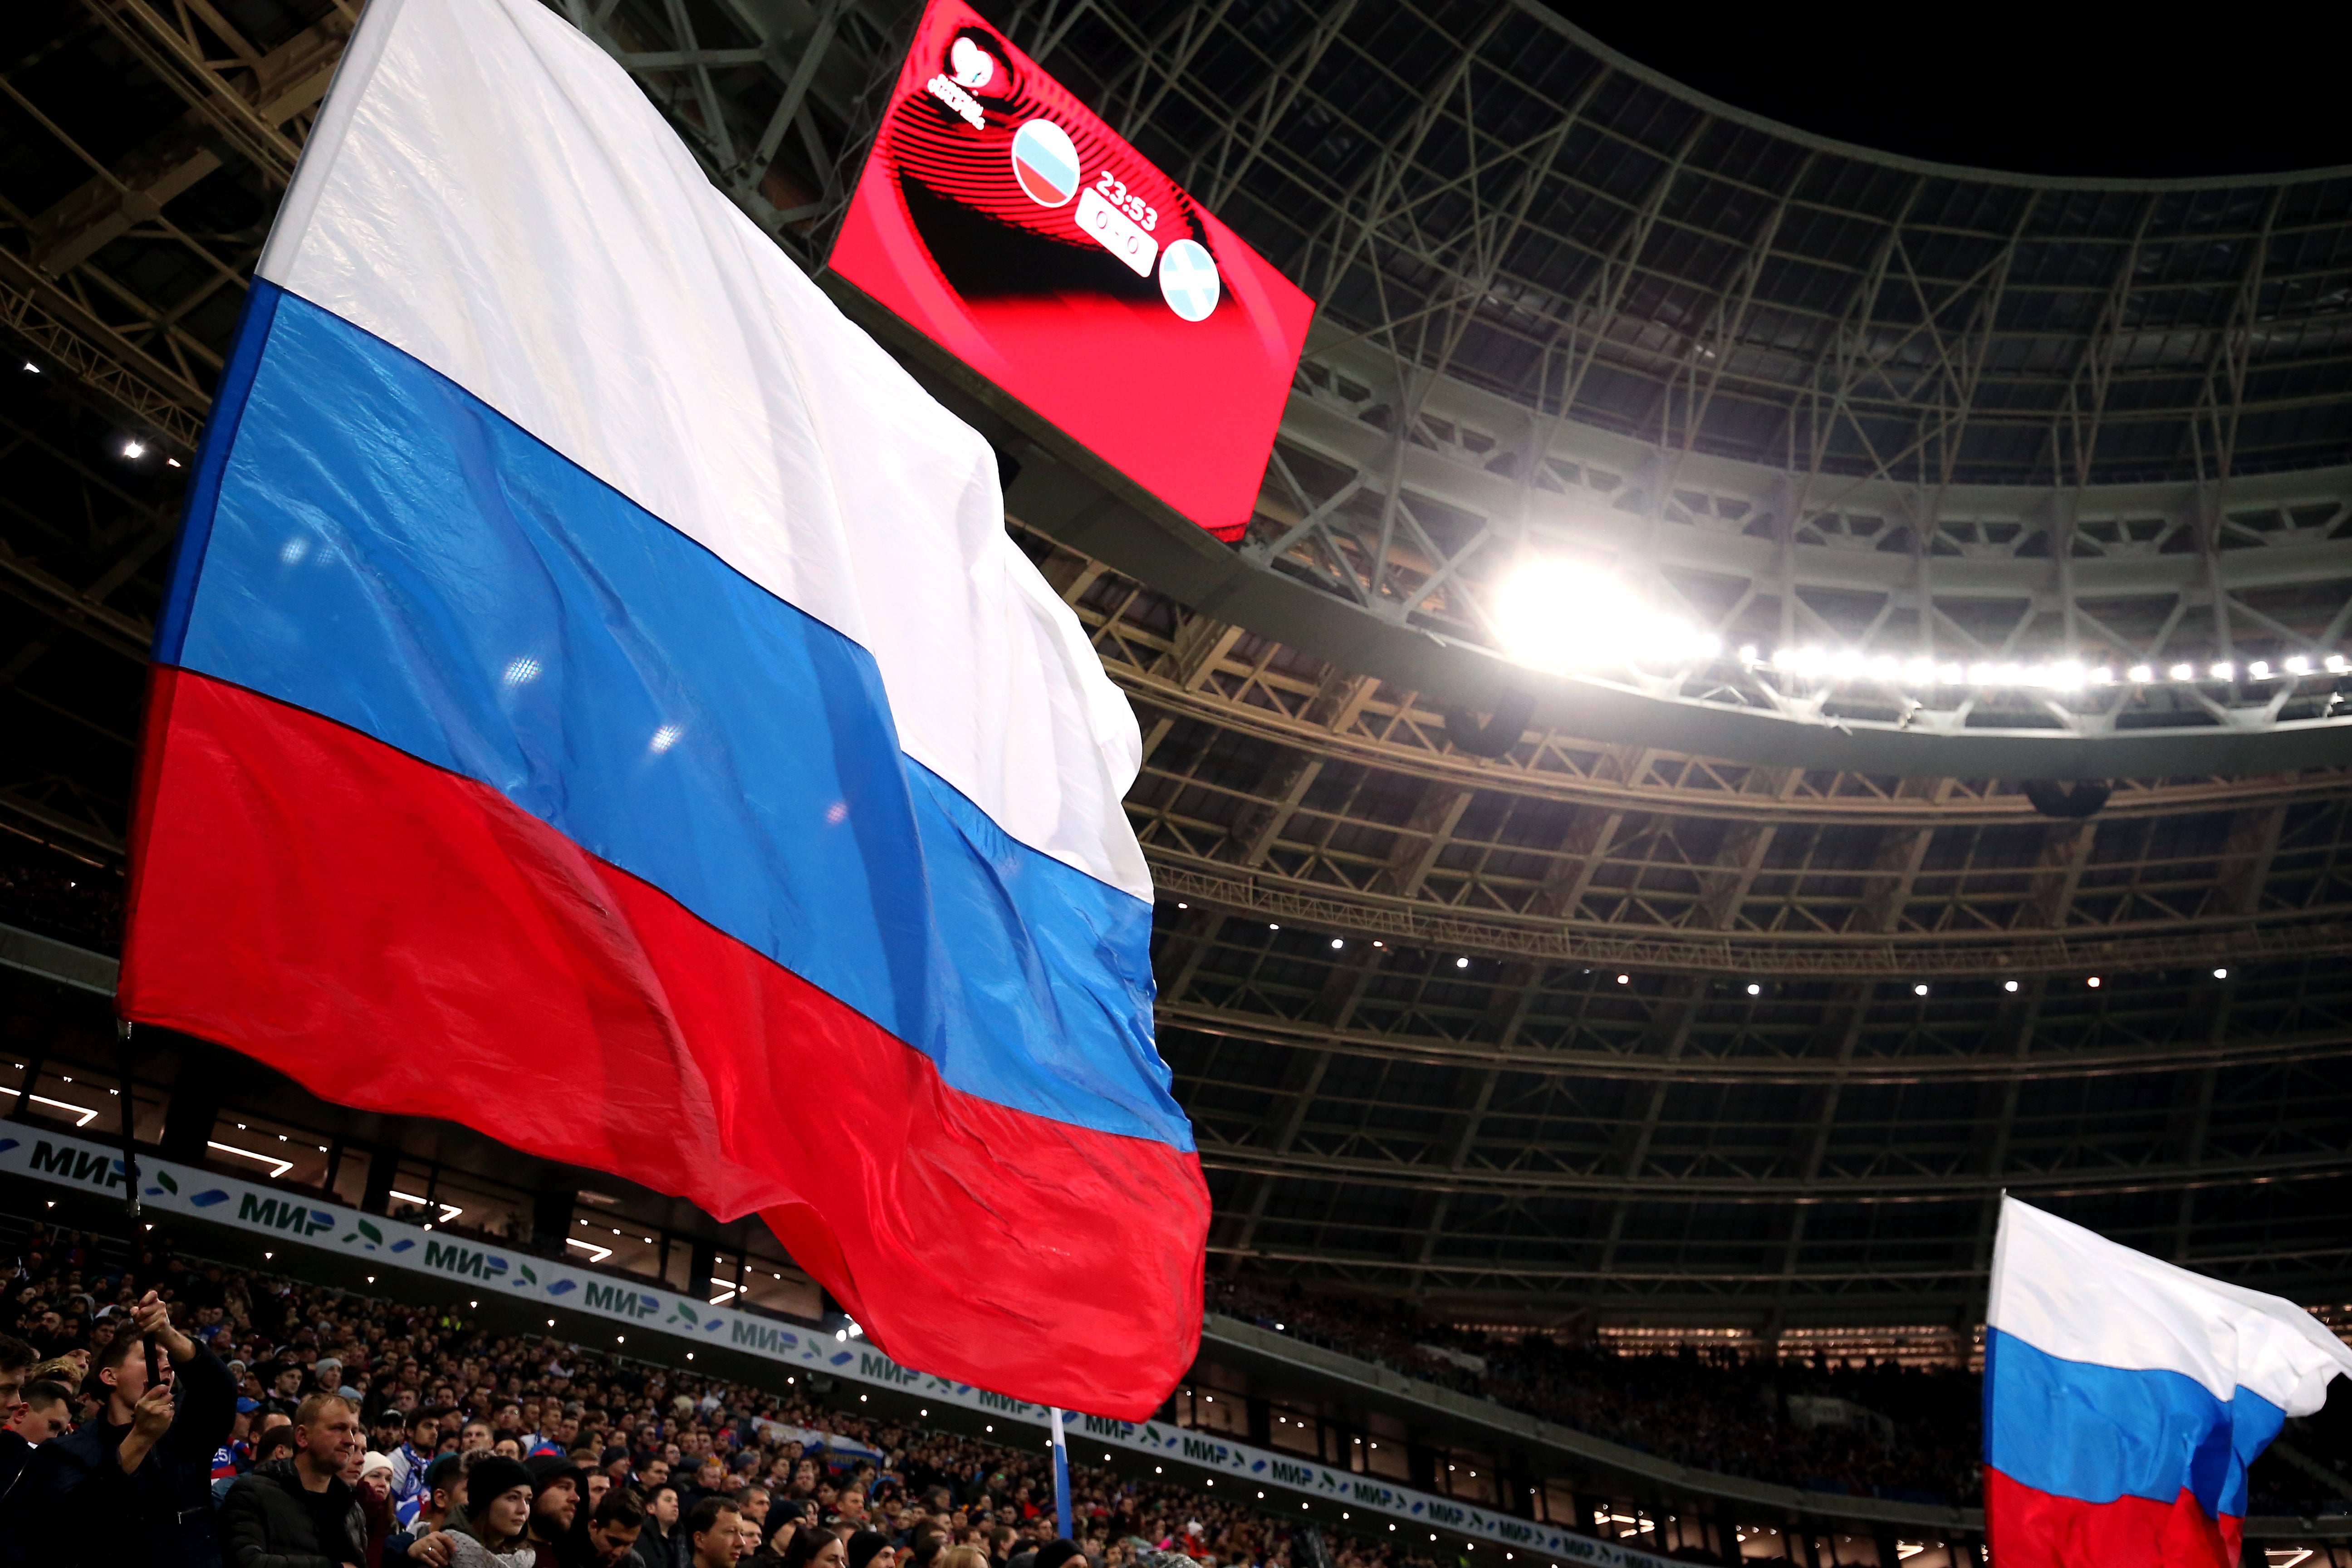 CAS has upheld UEFA and FIFA’s decision to suspend Russian national teams and clubs from their competitions over the invasion of Ukraine (Steven Paston/PA)